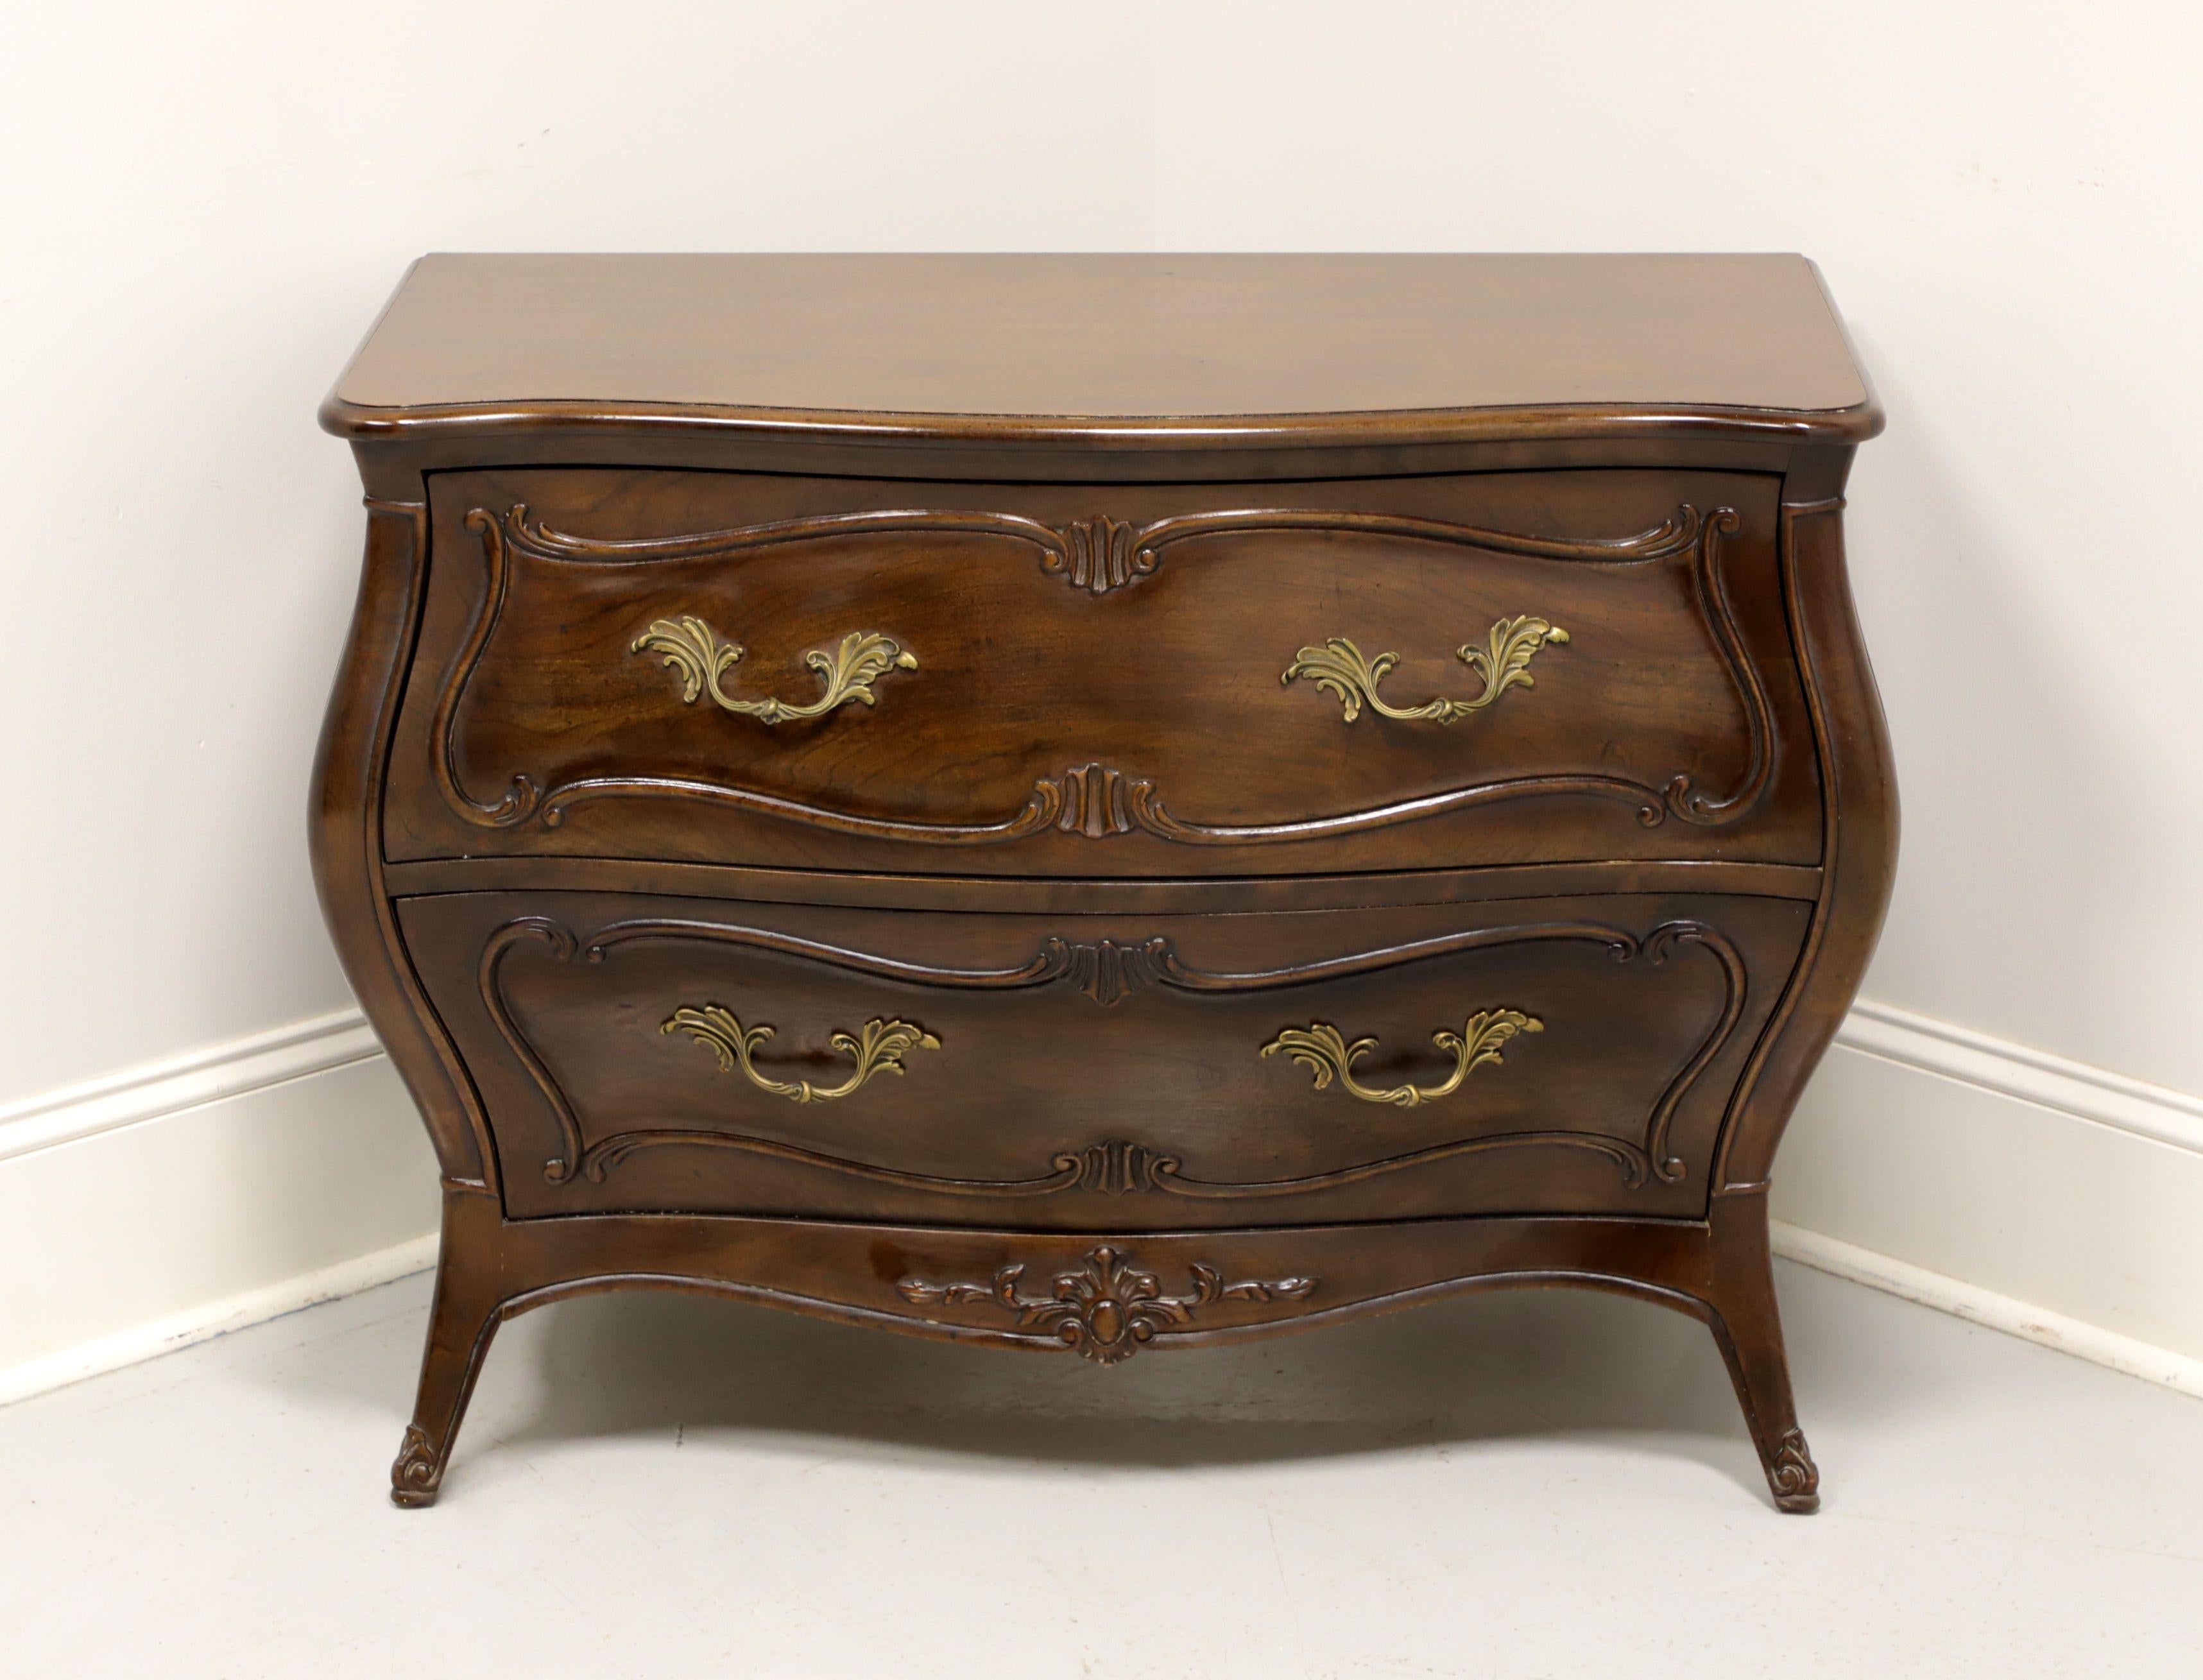 A French Country style low bombe chest by Henredon, from their Folio 10 Collection. Walnut with decorative brass hardware, curved front, carved apron and flared legs. Features two drawers of dovetail construction. Made in the USA, in the late 20th